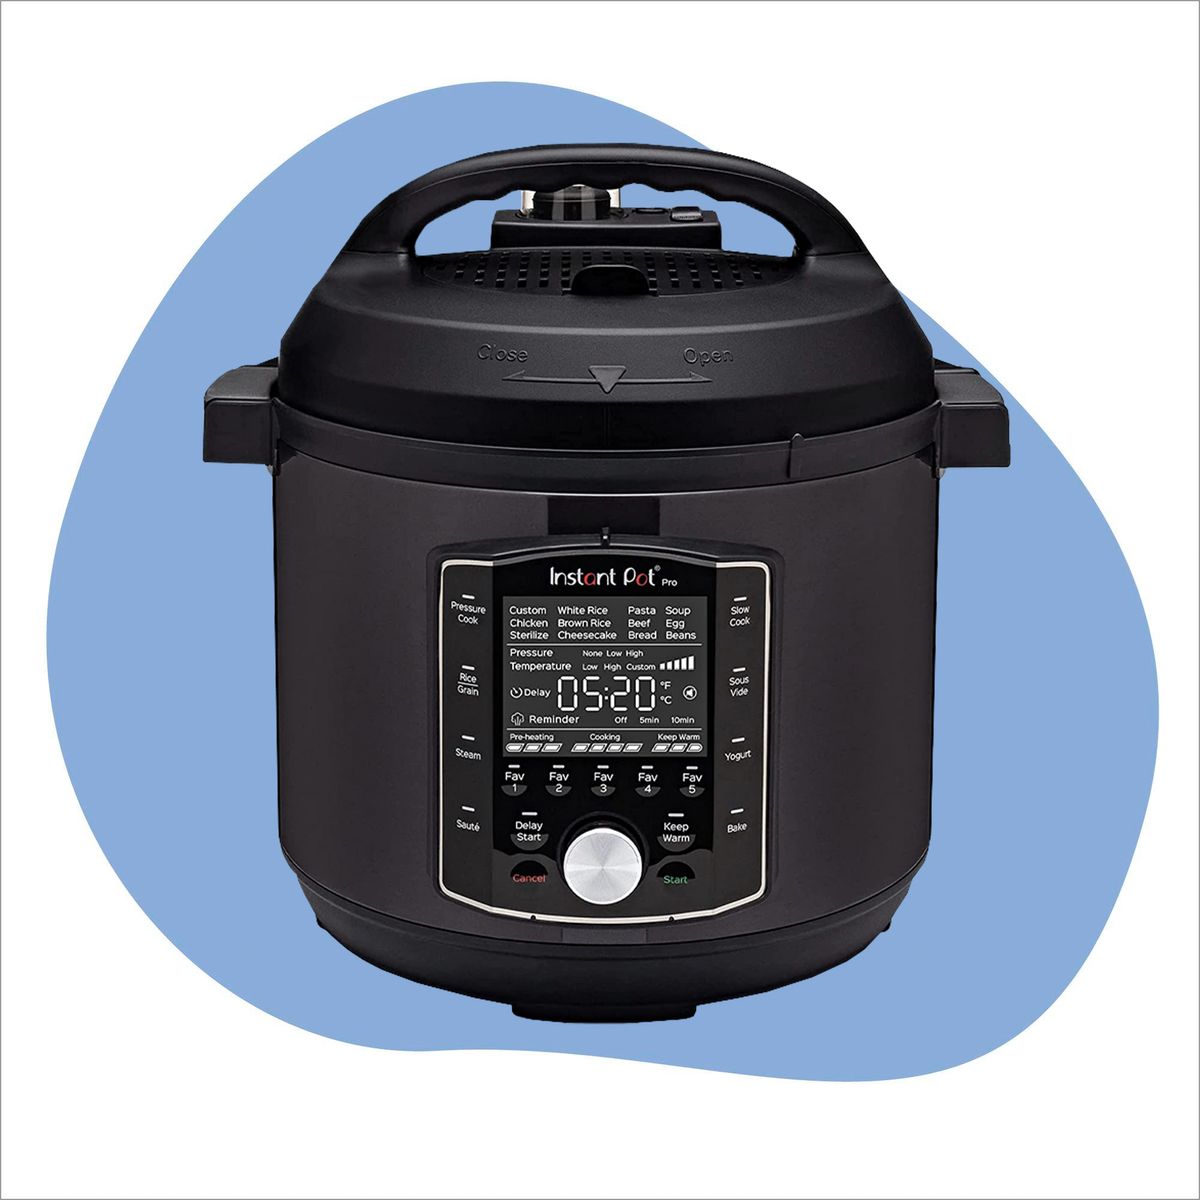 Instant Pot Duo 7-In-1 Electric Pressure Cooker Non Stick Coating